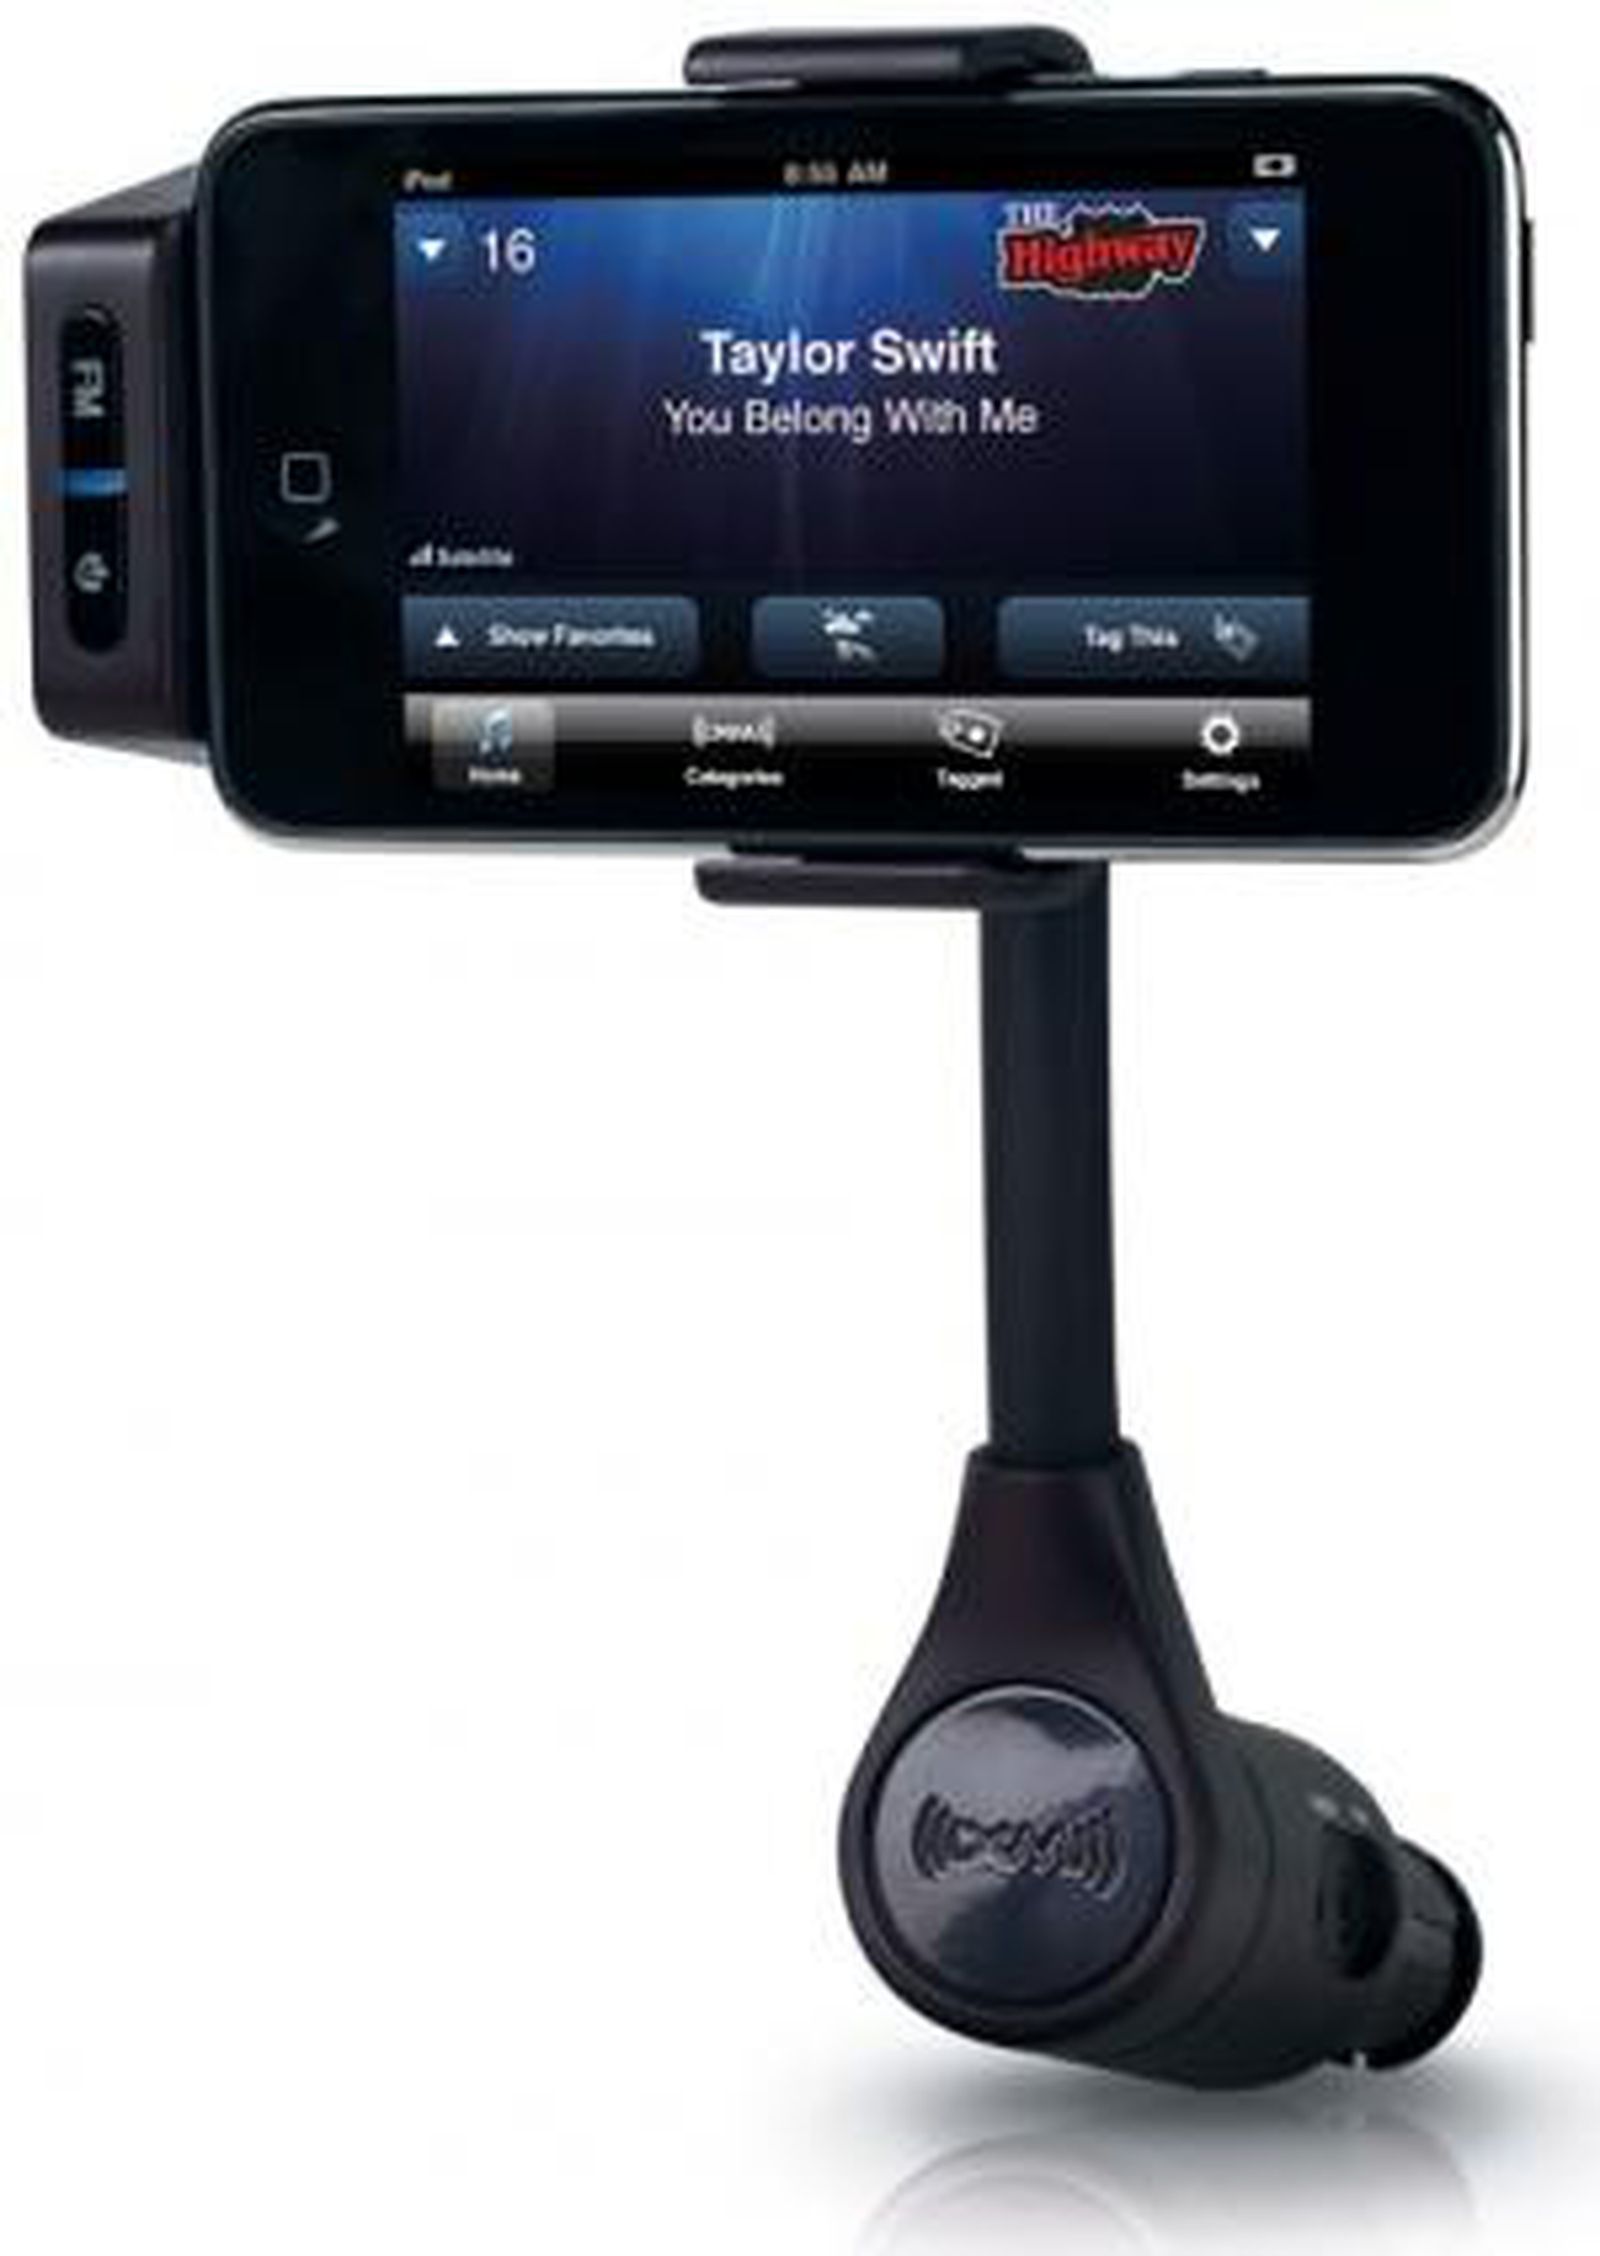 Sirius XM Introduces 'XM SkyDock' Satellite Radio Adapter for iPhone and  iPod Touch - MacRumors